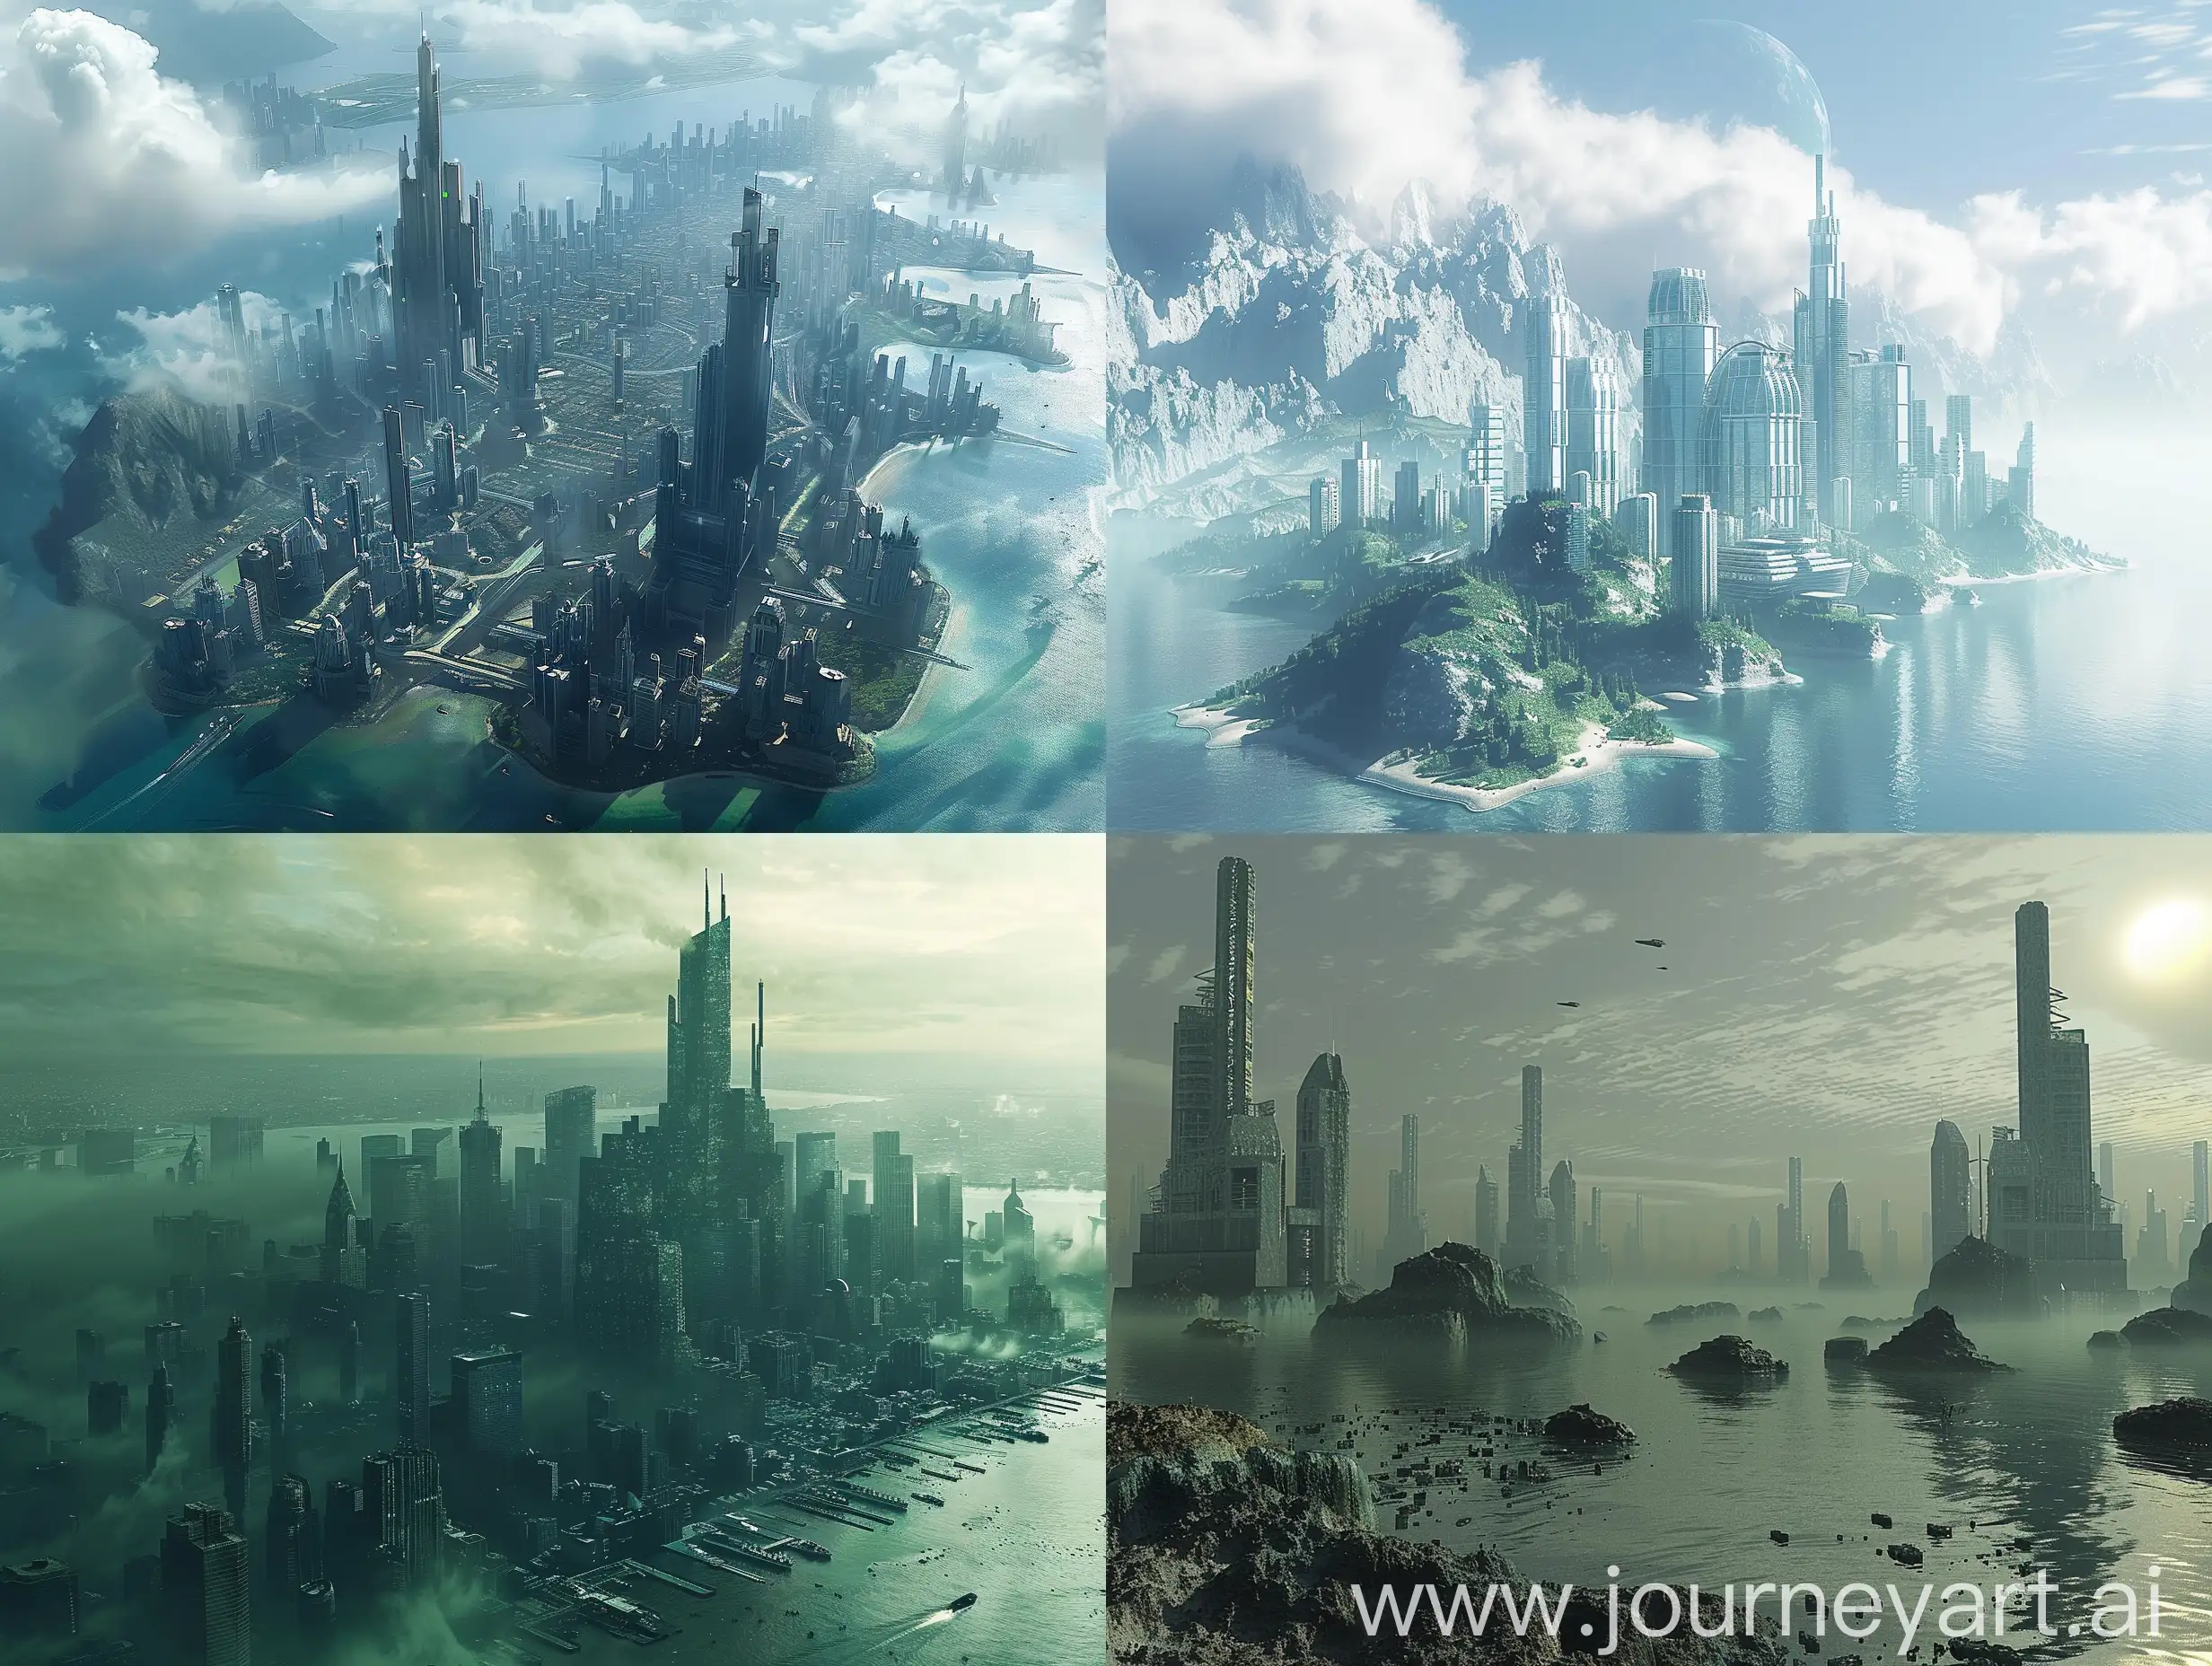 a urban city in the middel of a Rocky world with a nitrogen-oxygen atmosphere and a significant hydrosphere. Oceans cover more than 90% of the surface, with scattered islands making up the remaining percentage., skyscrapers, settlemnt, urban outpost, minimalist